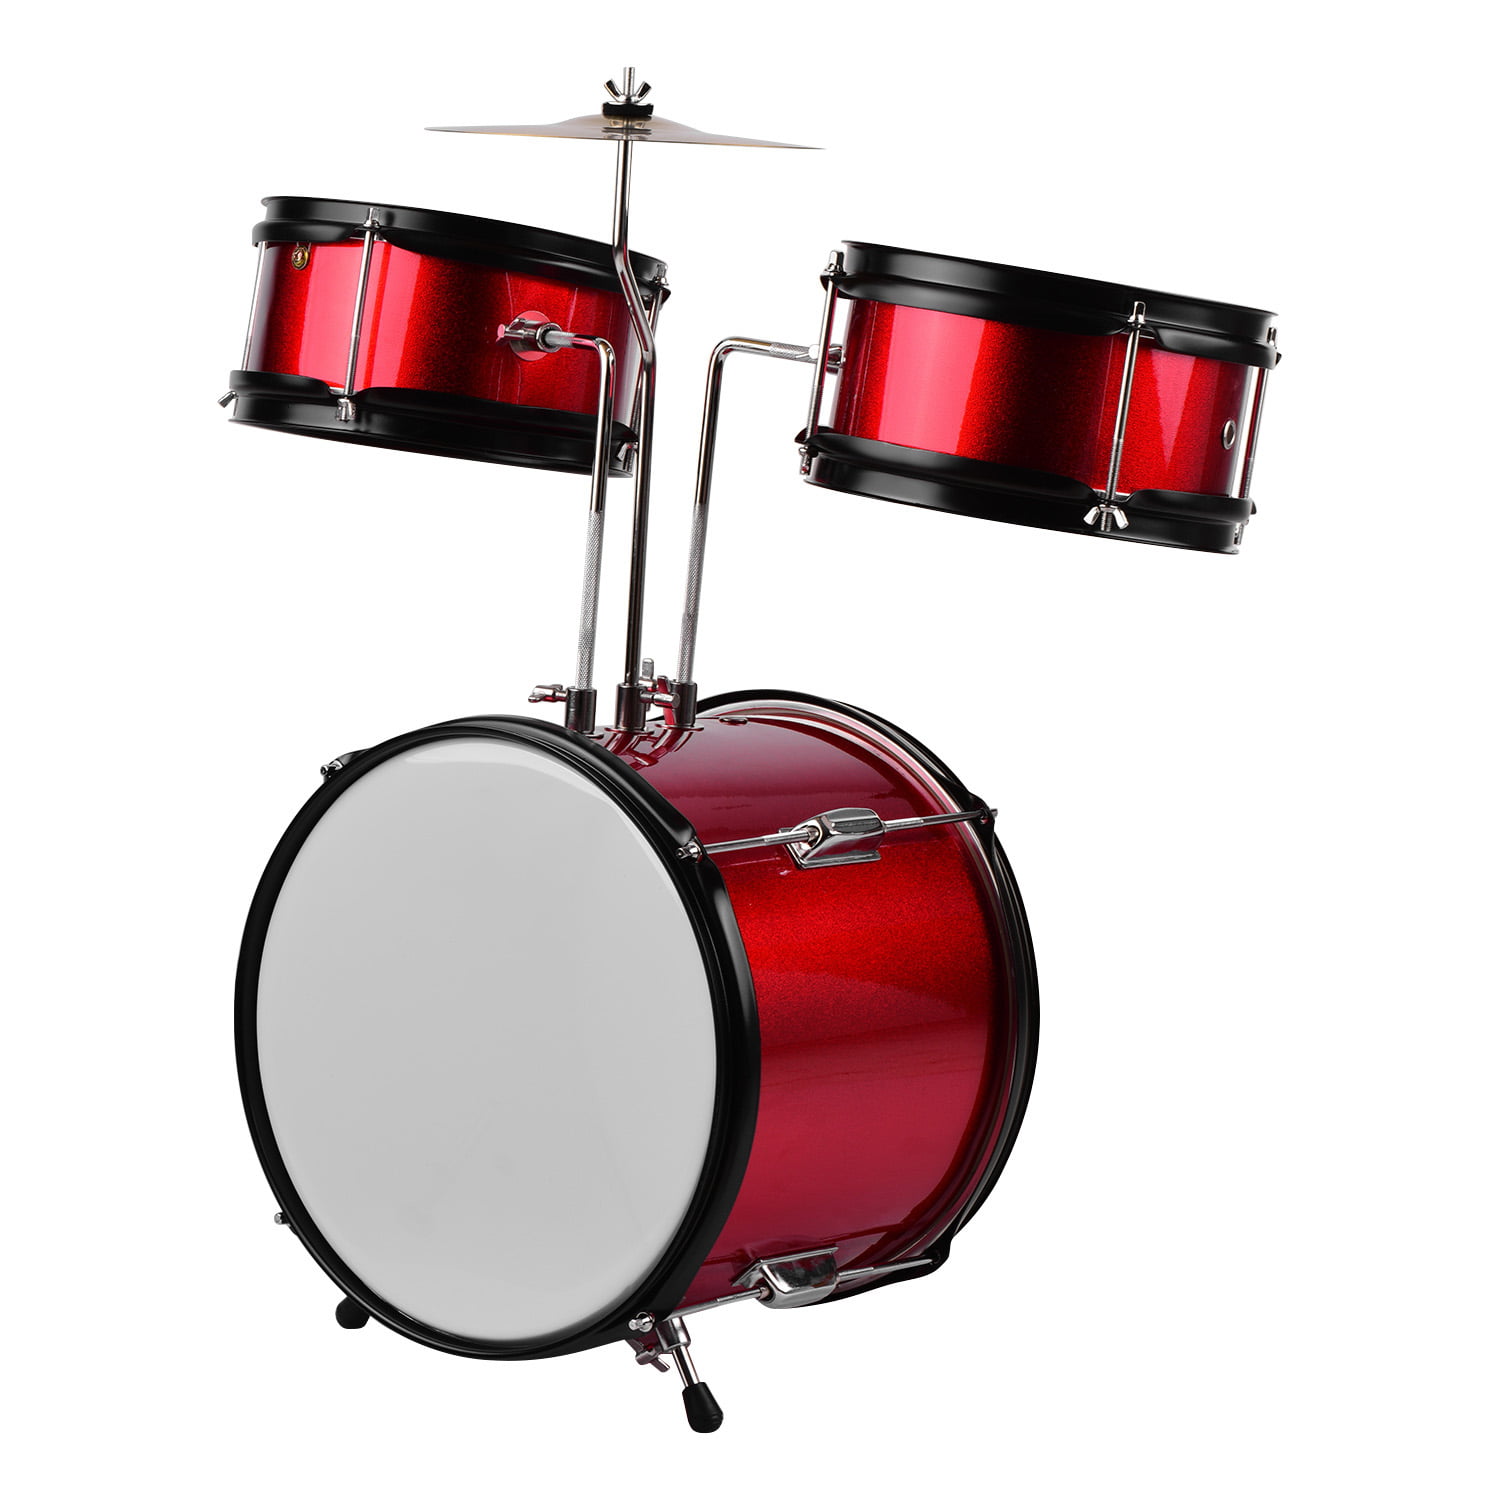 Kids Children Junior Beginners 3-Piece Drum Set Drums Kit Percussion Musical Instrument with Cymbal Drumsticks Adjustable Stool Red